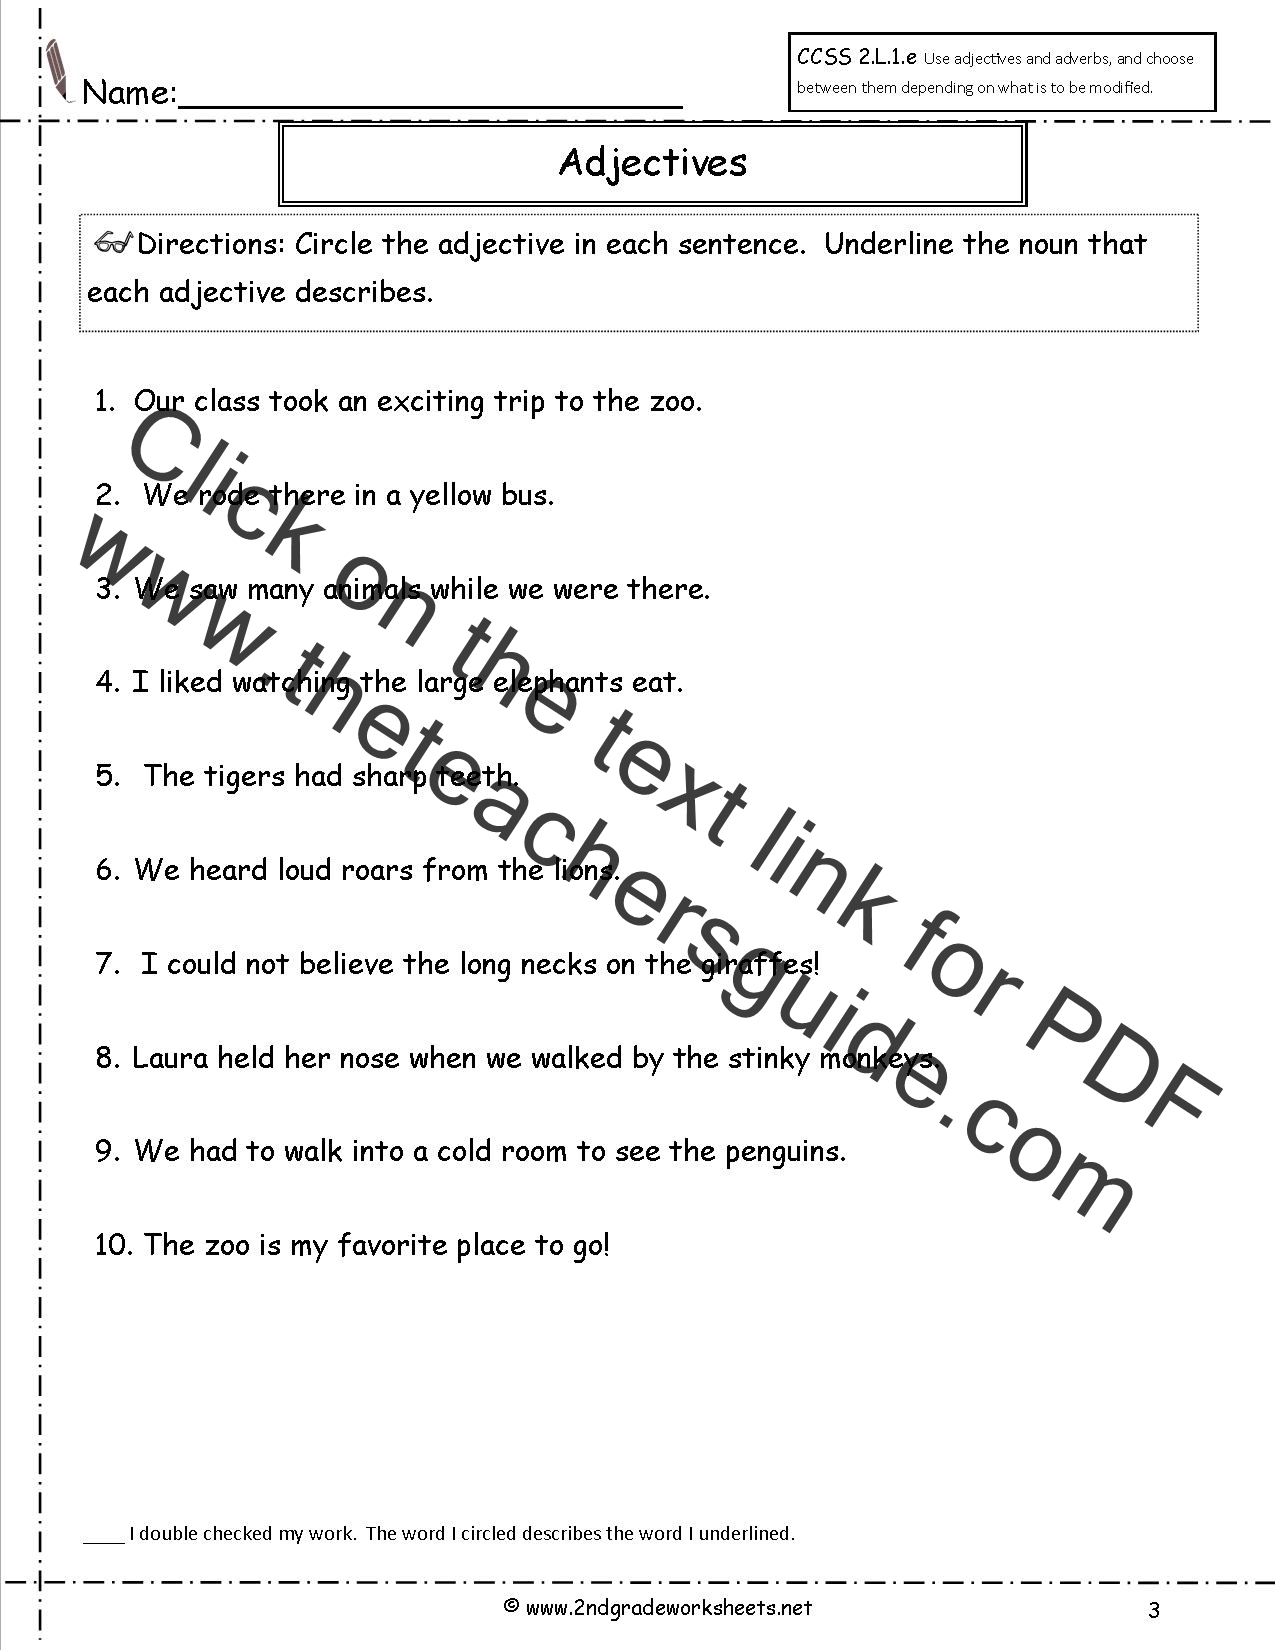 english-identify-adjectives-worksheets-for-the-kids-of-grade-1-help-kids-to-learn-adjectives-in